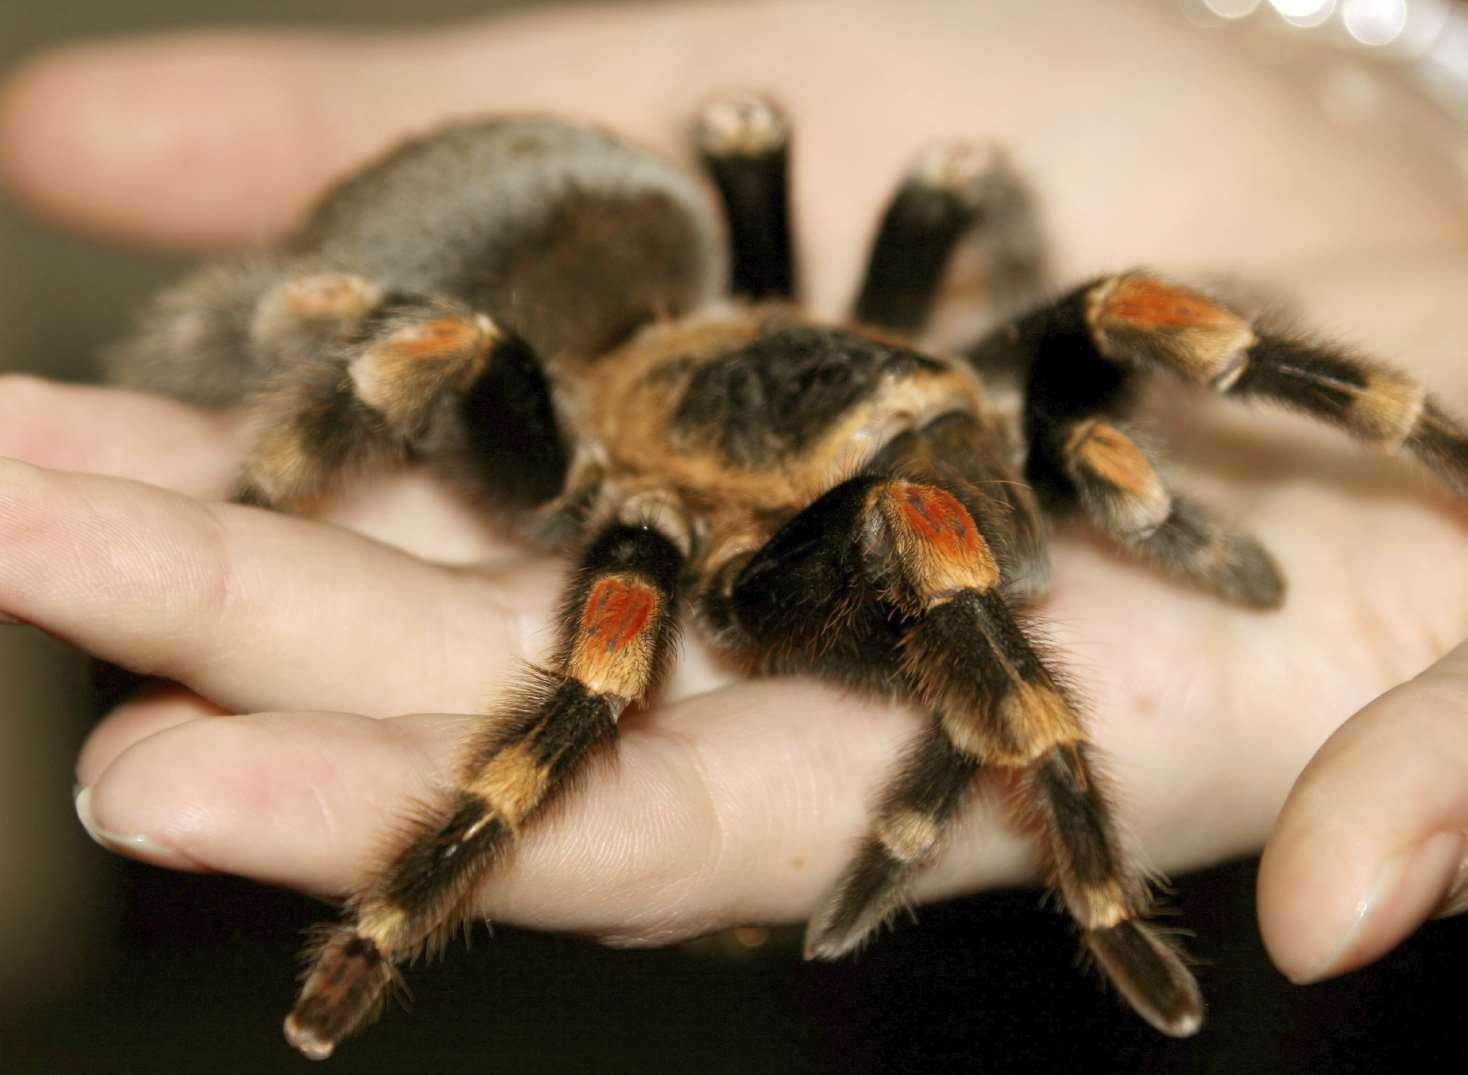 Get hands on at the South East Arachnid Show